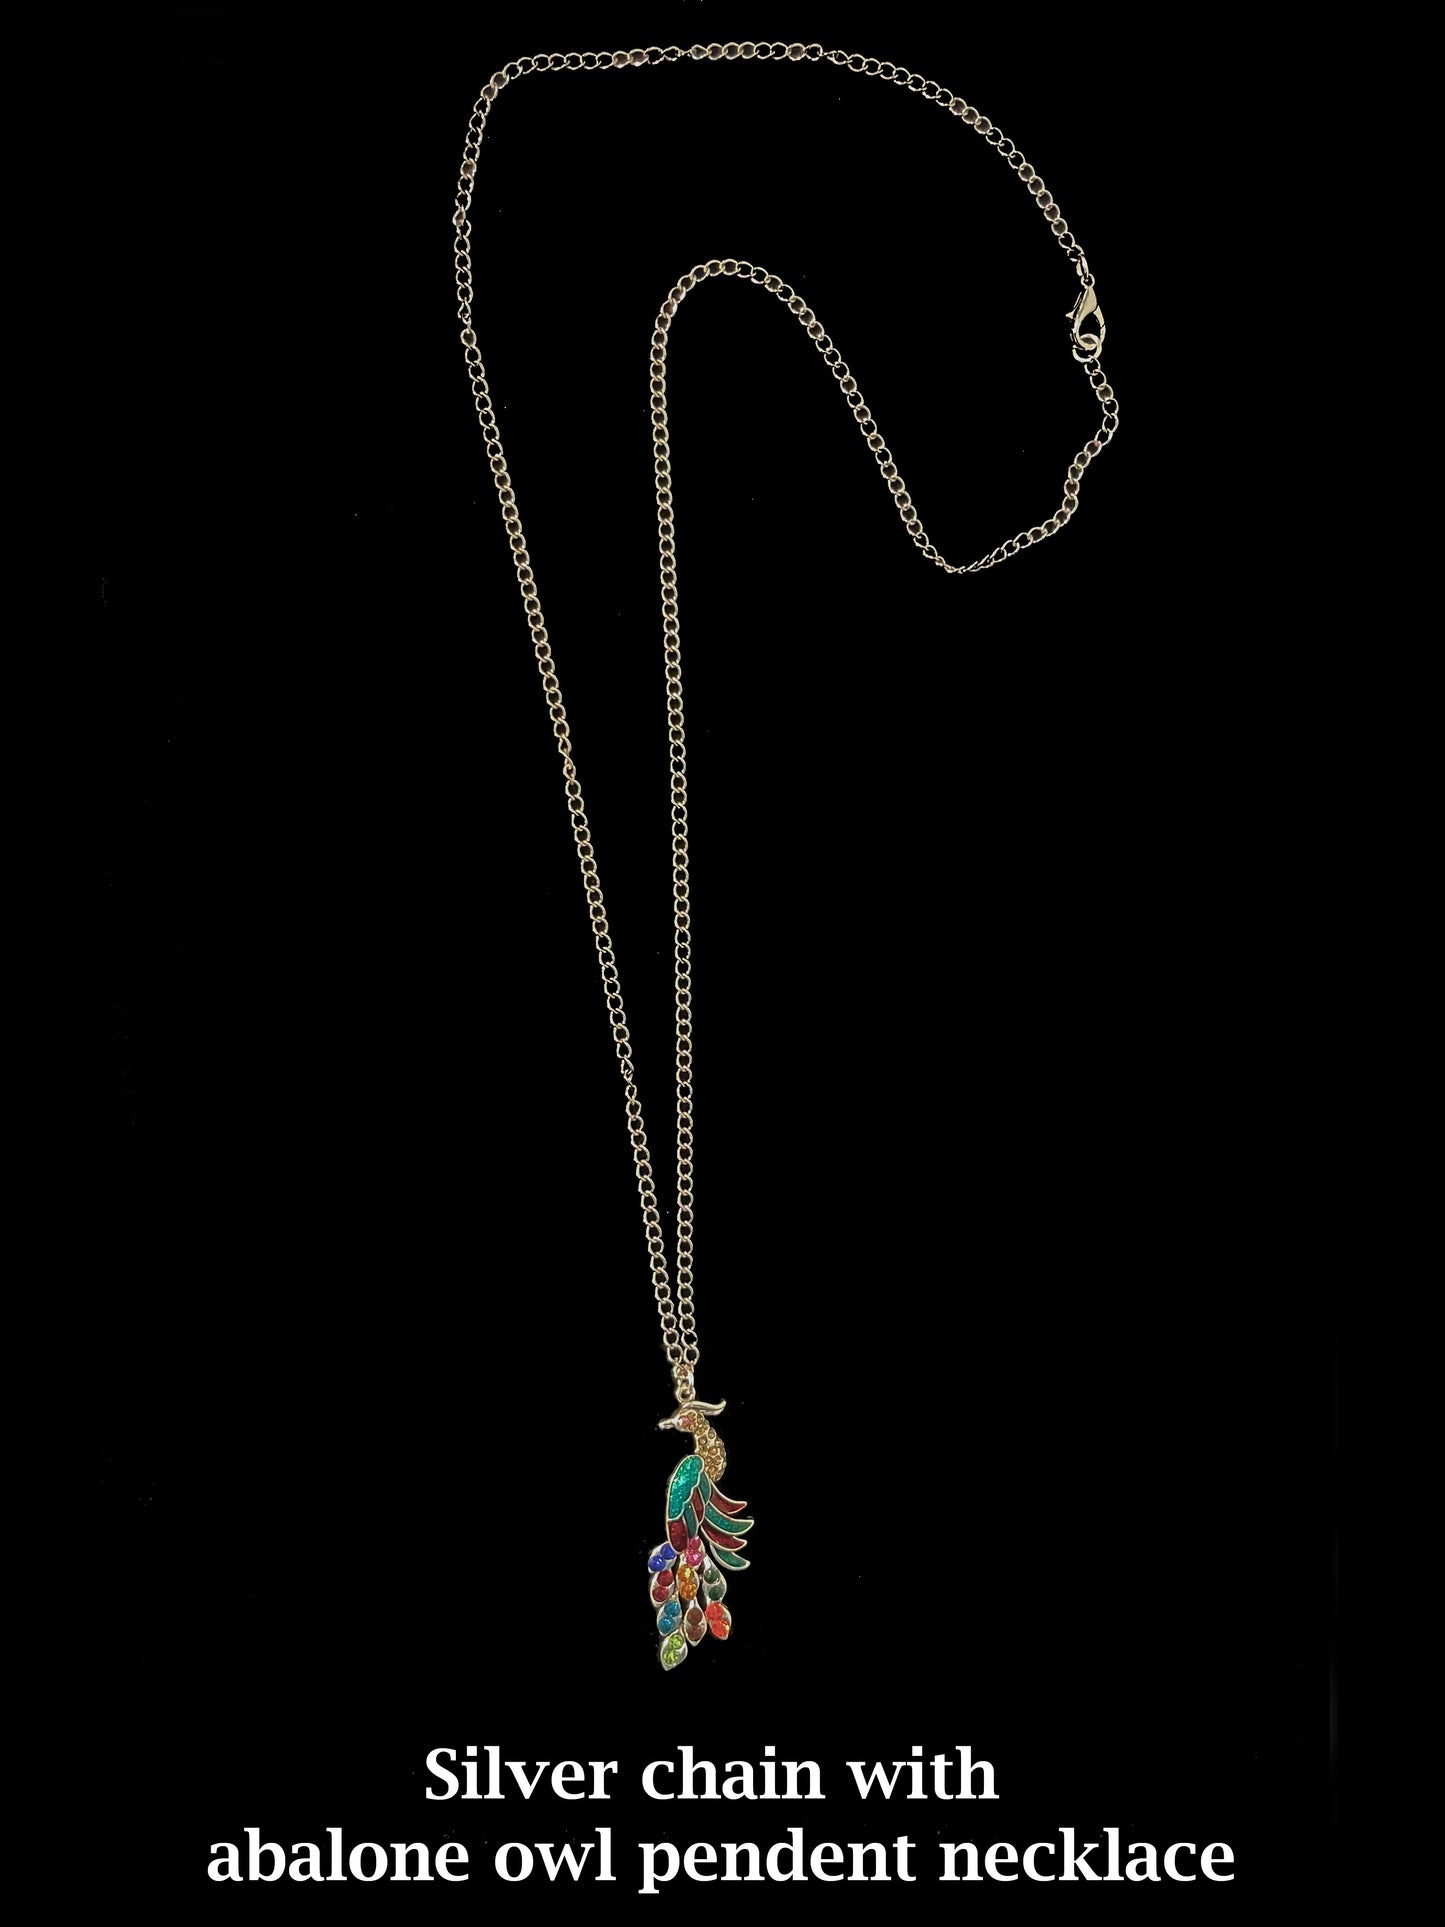 Silver chain with peacock pendant necklace